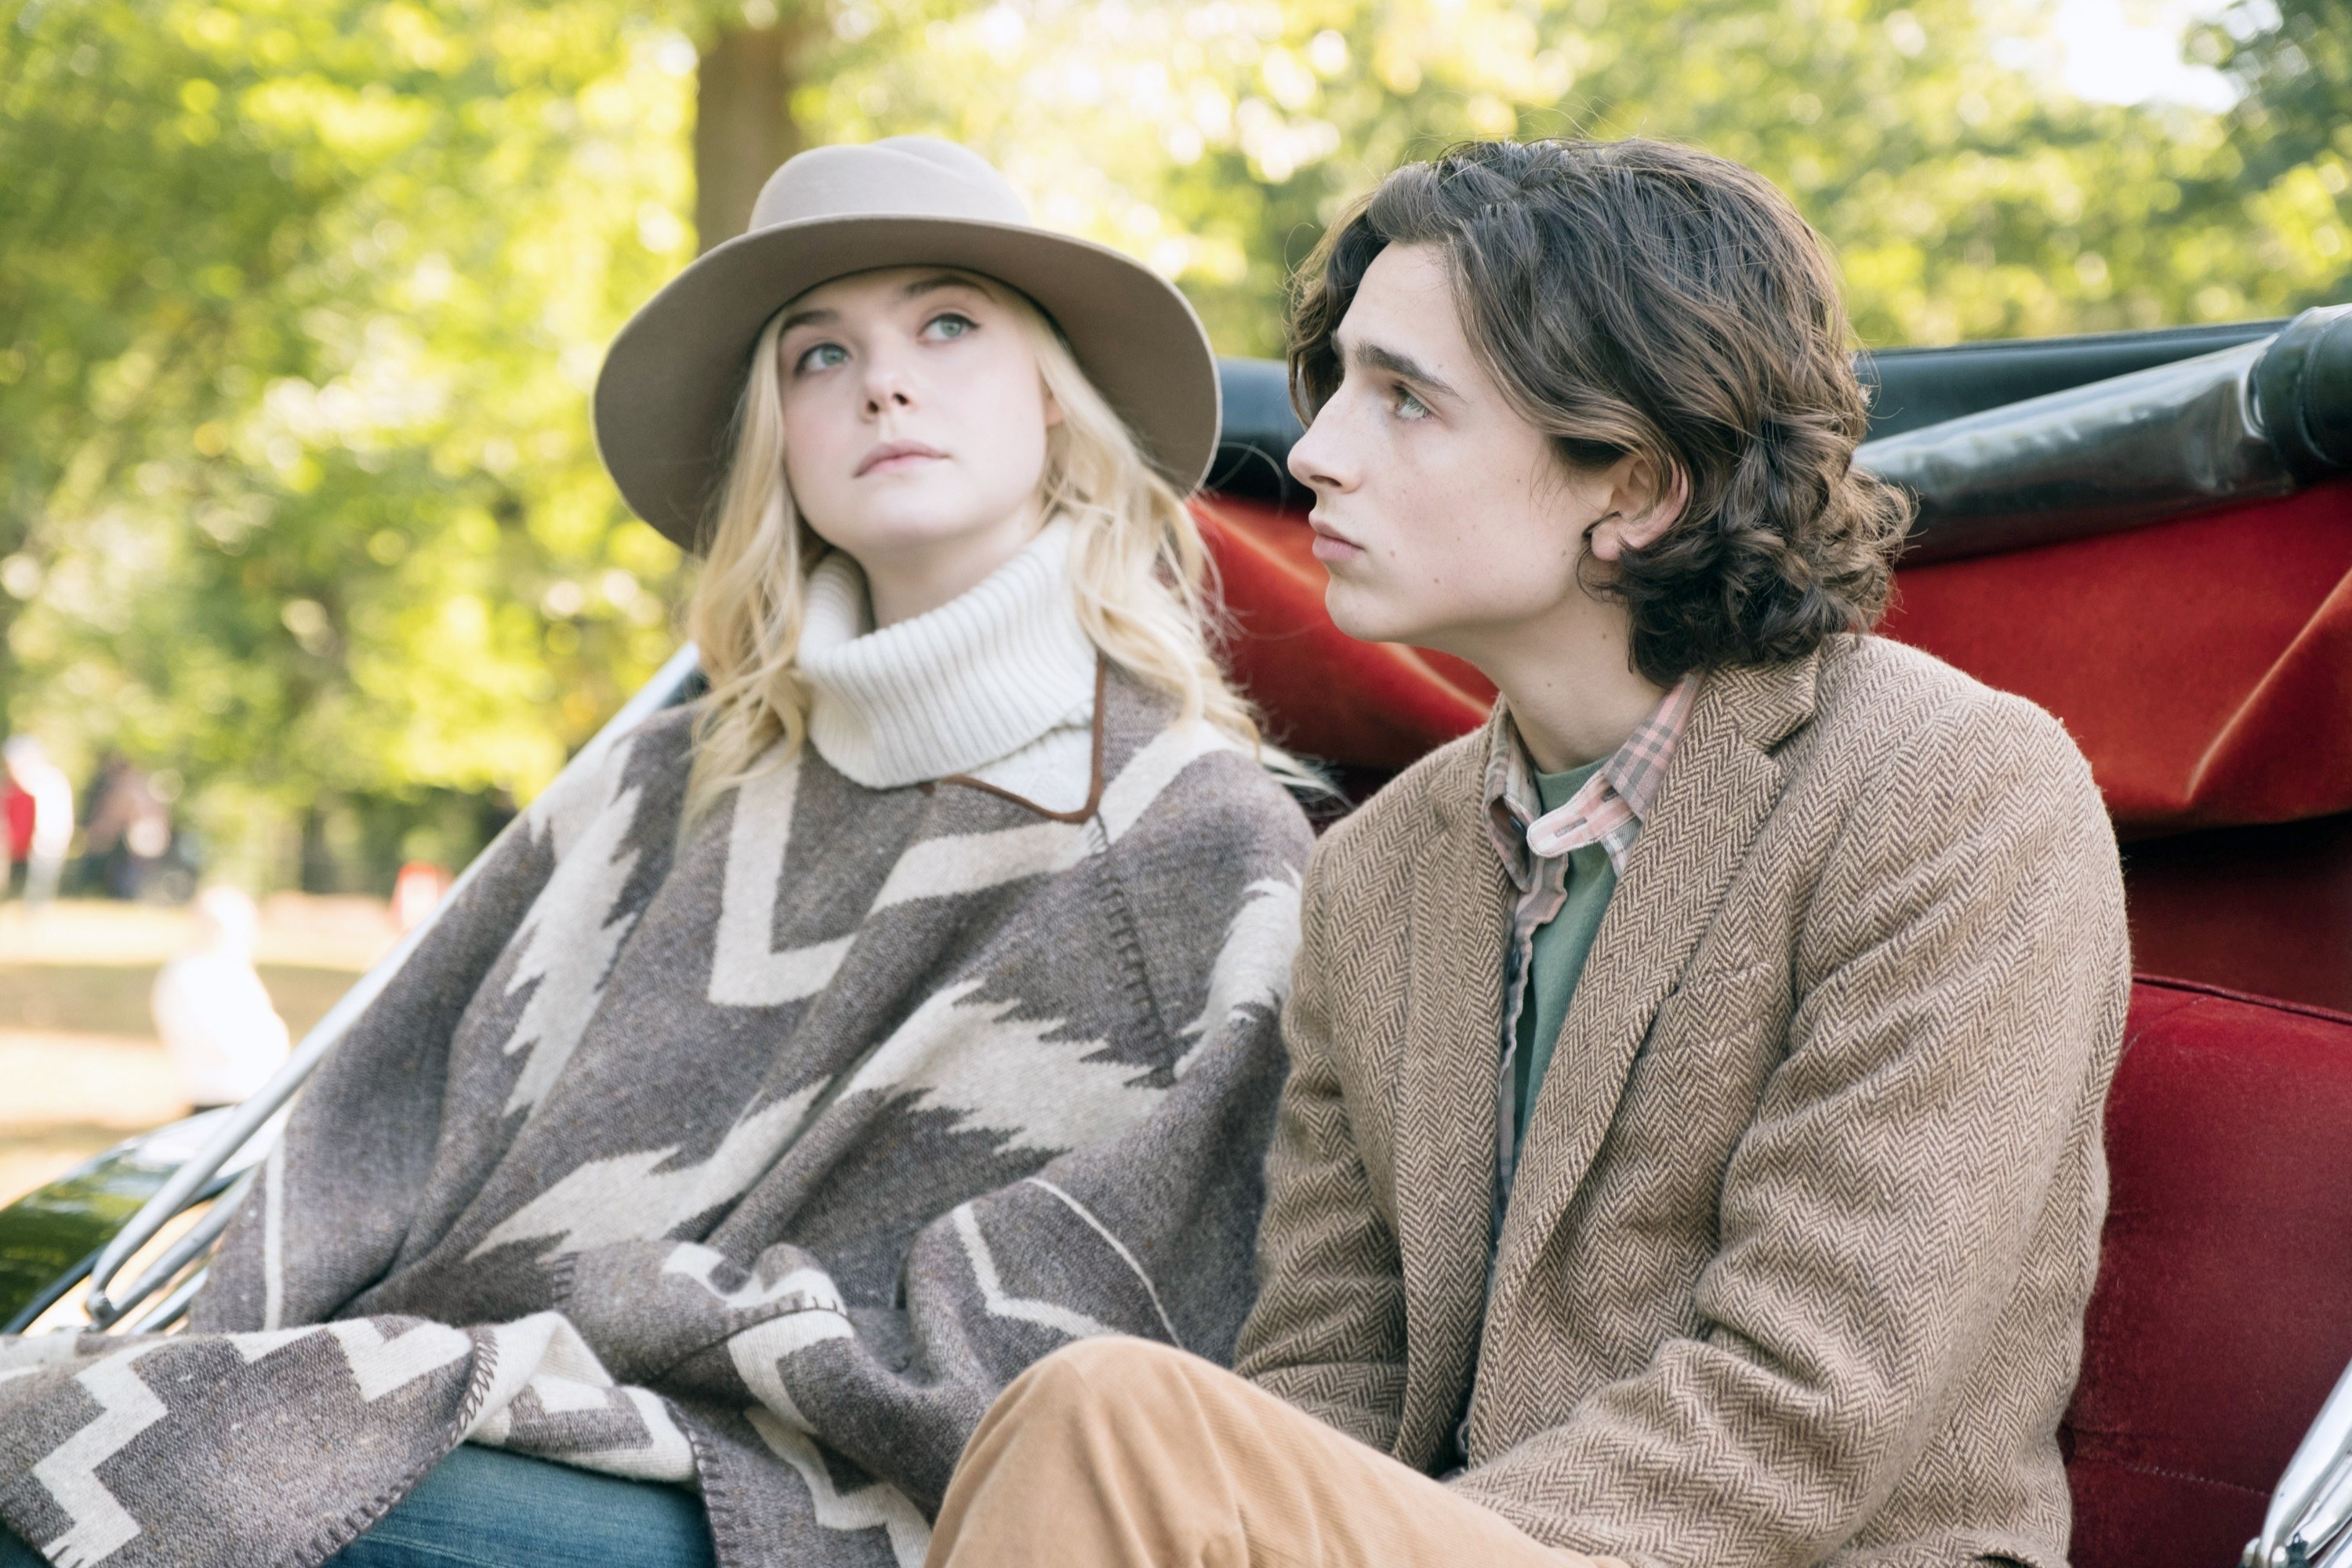 Elle Fanning and Timothee Chalamet ride in a carriage together